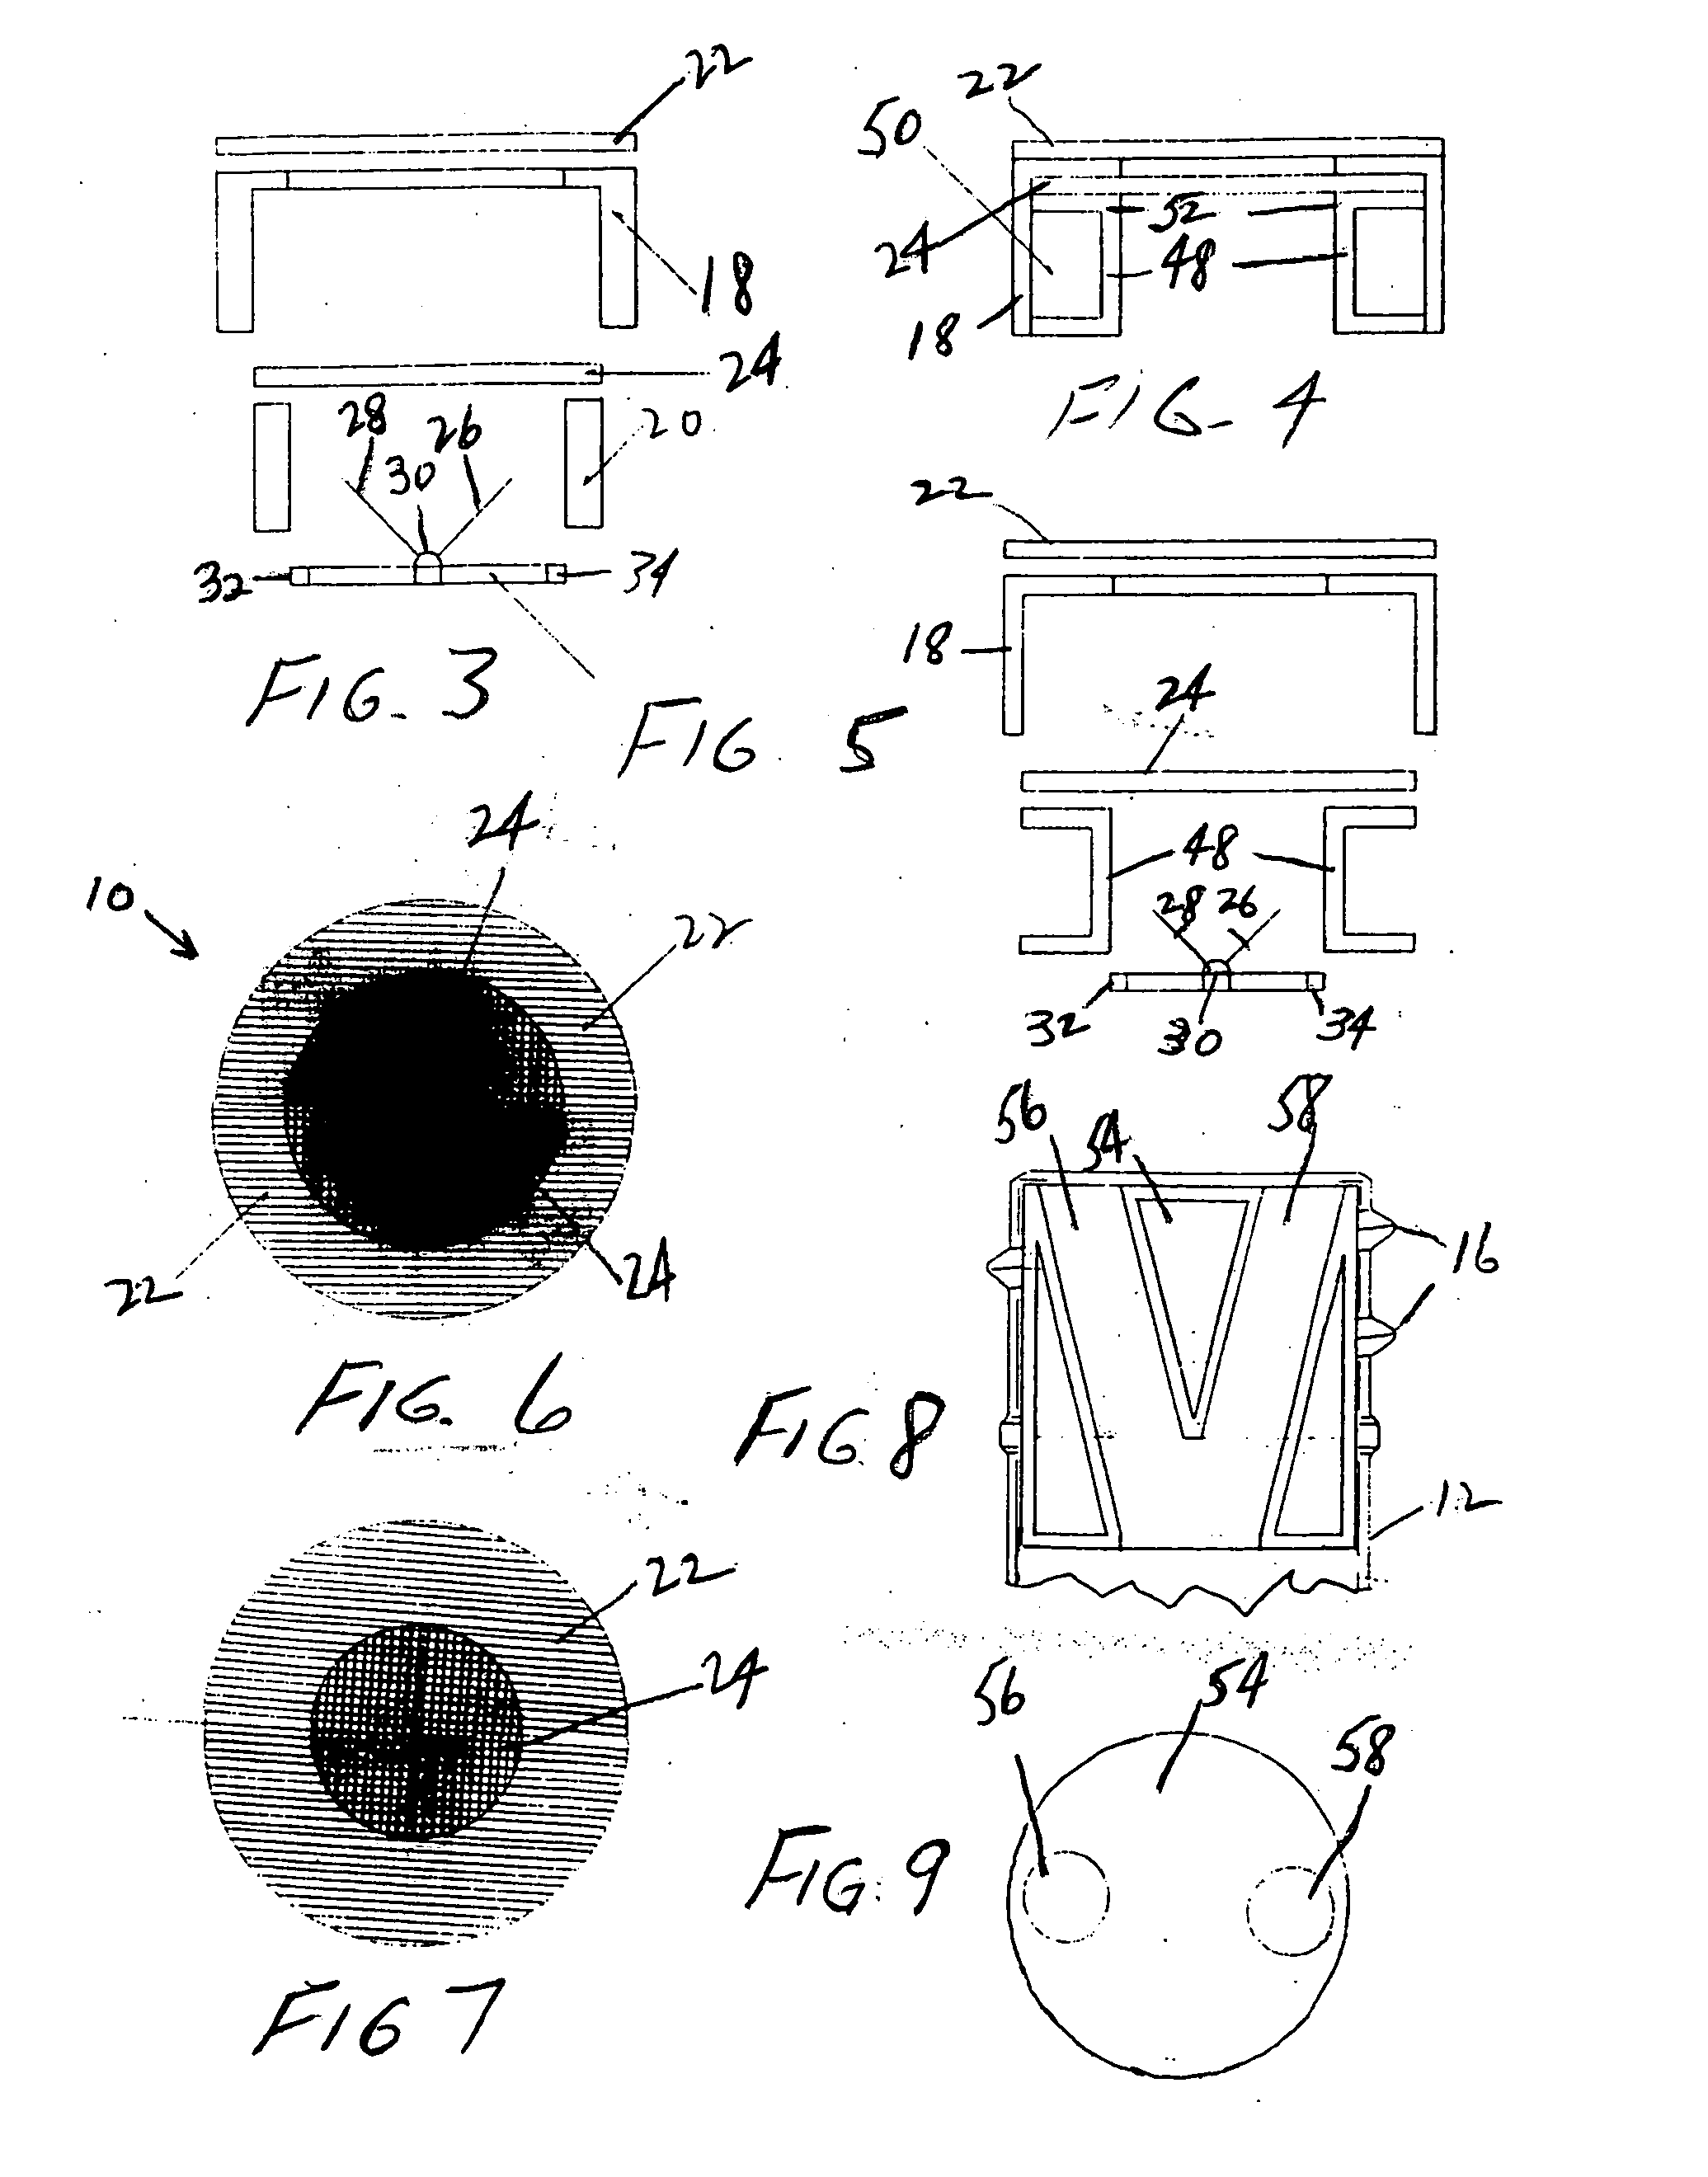 Tamper evident check valve apparatus for use in a beverage bottle and method of use